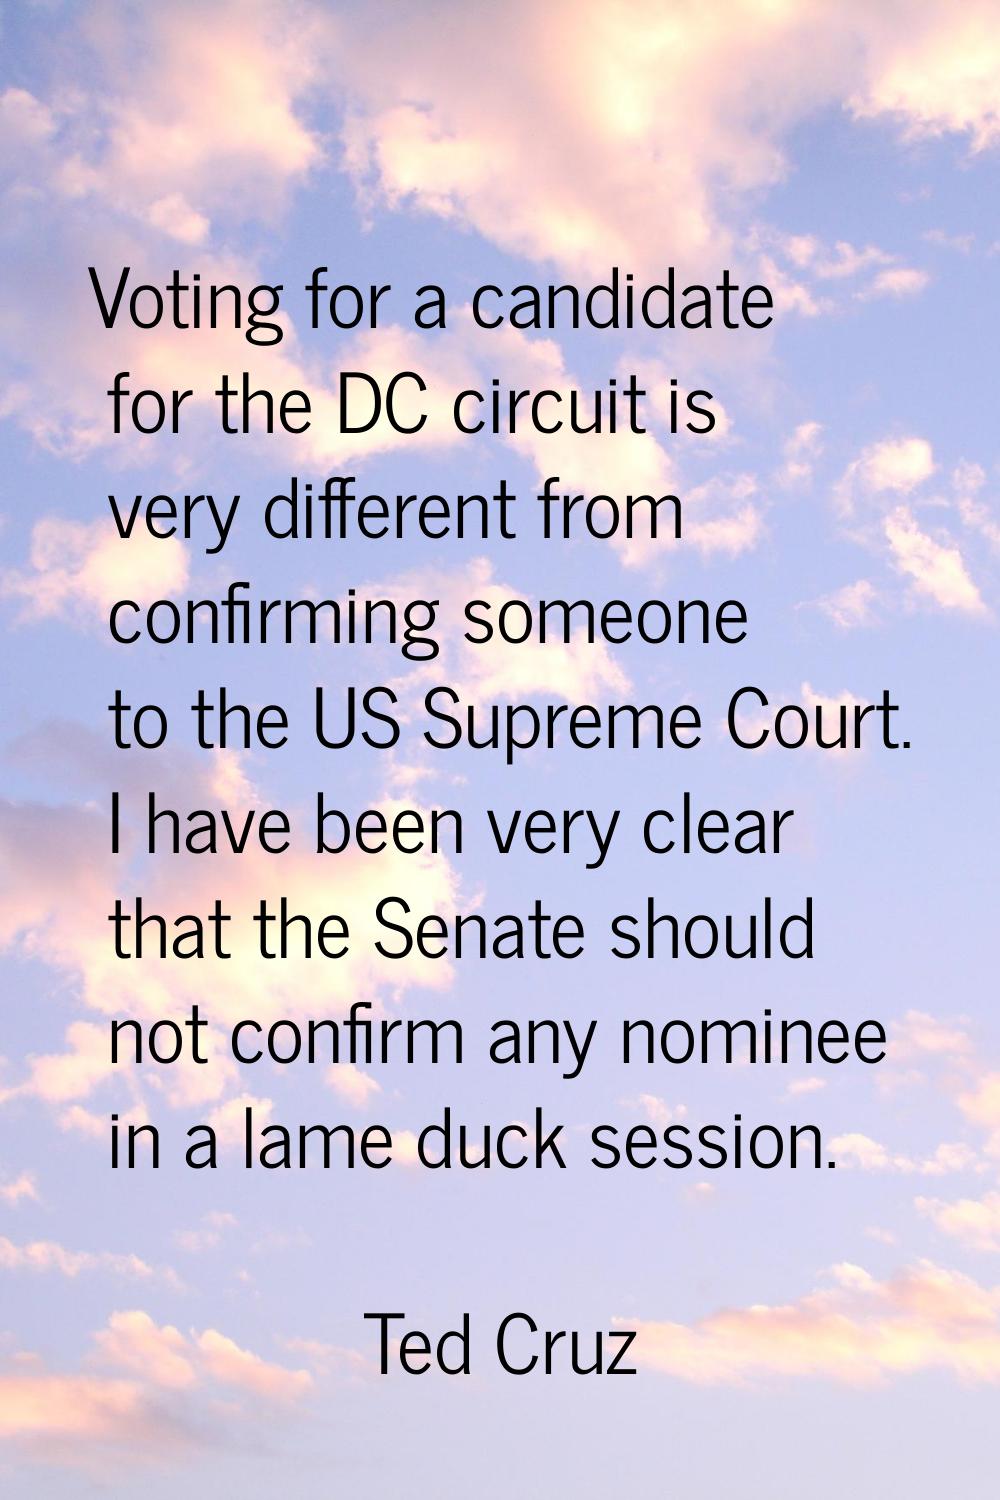 Voting for a candidate for the DC circuit is very different from confirming someone to the US Supre